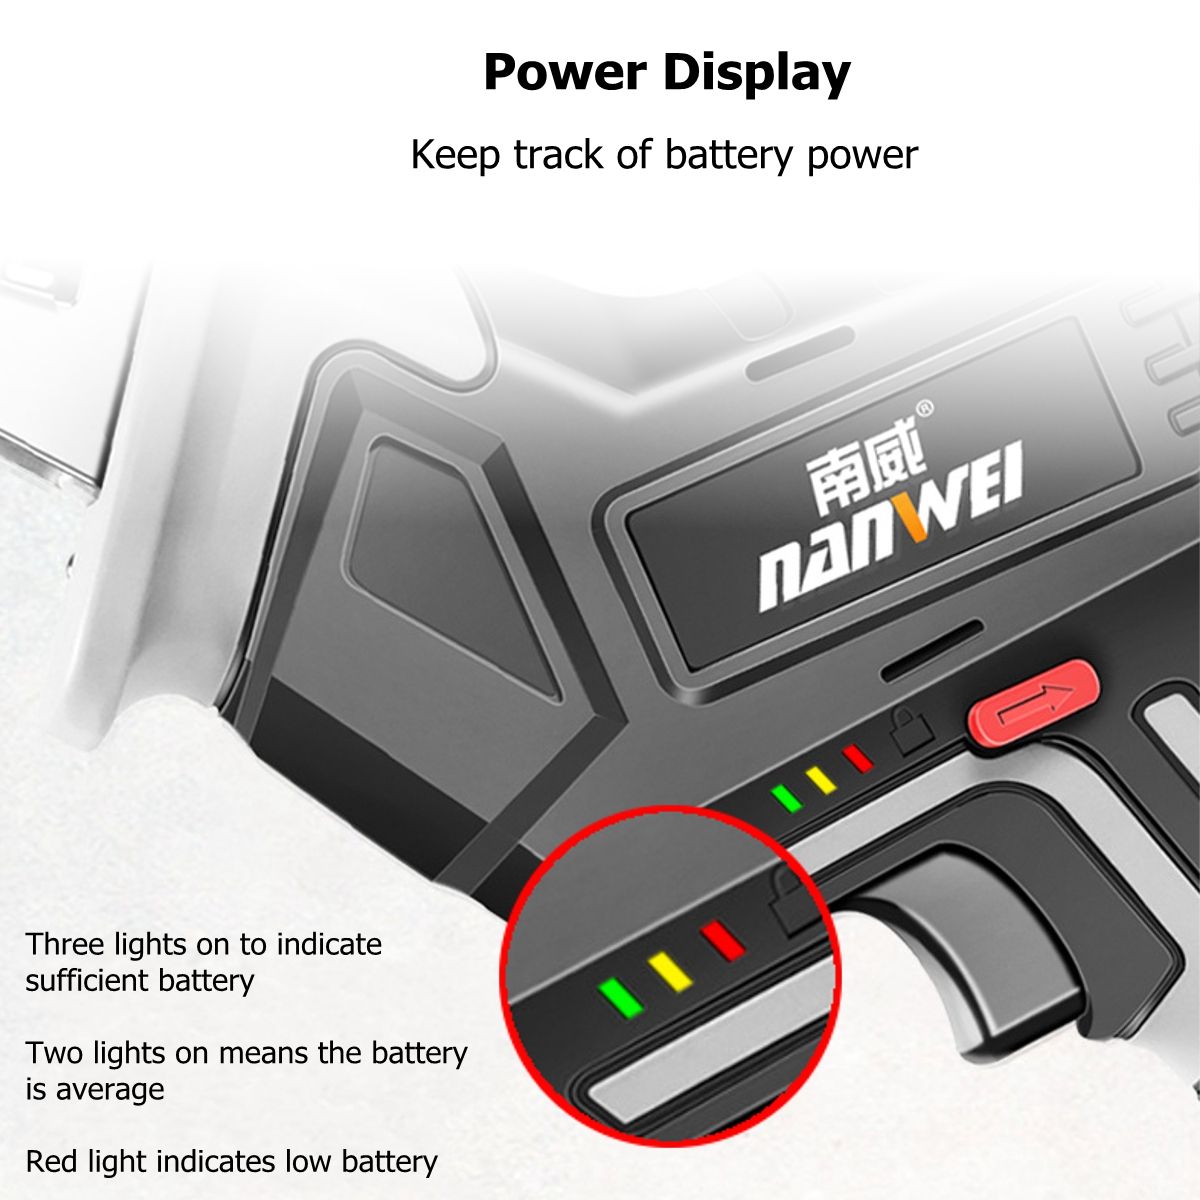 NANWEI-220V-18V36VF42VF-Brushless-Reciprocating-Saw-Variable-Speed-with-Li-ion-Rechargeable-Battery--1760986